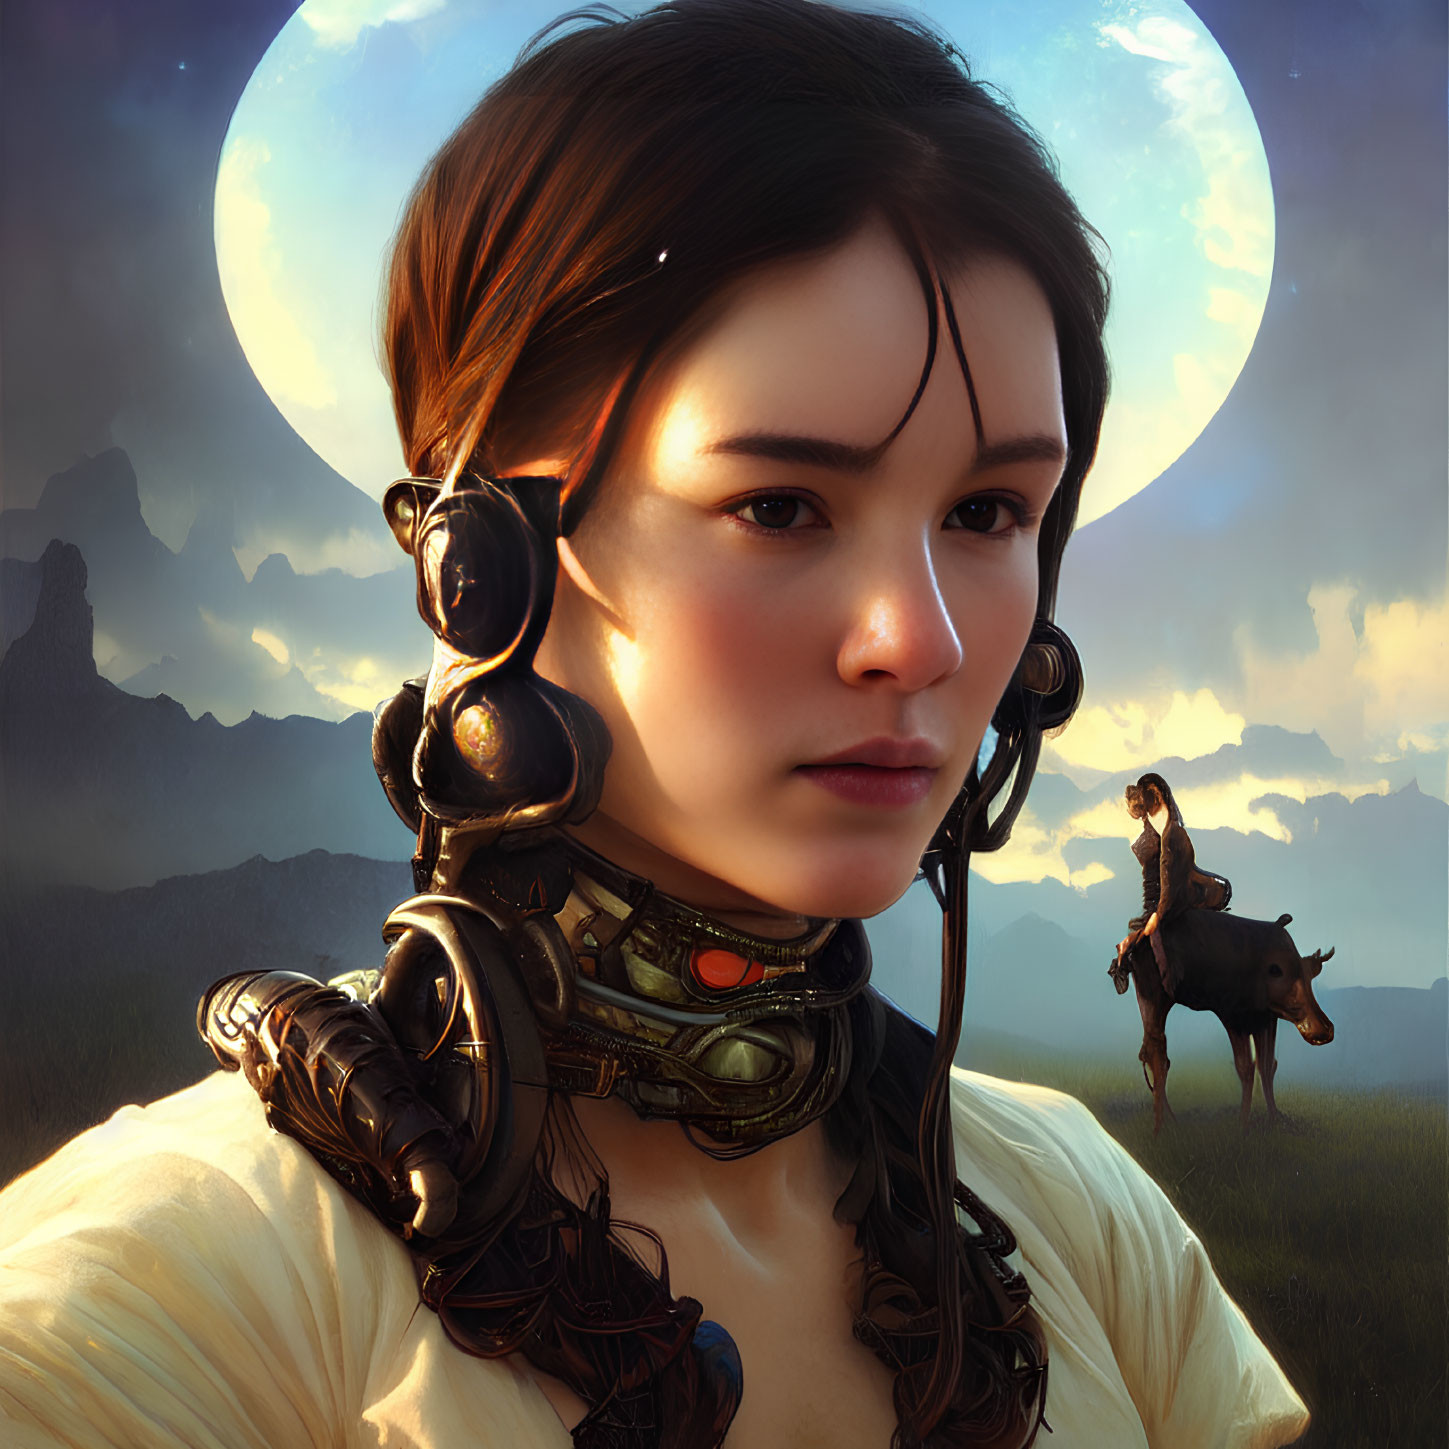 Digital Artwork: Woman with Futuristic Headphones, Two Moons, Field & Horse Rider